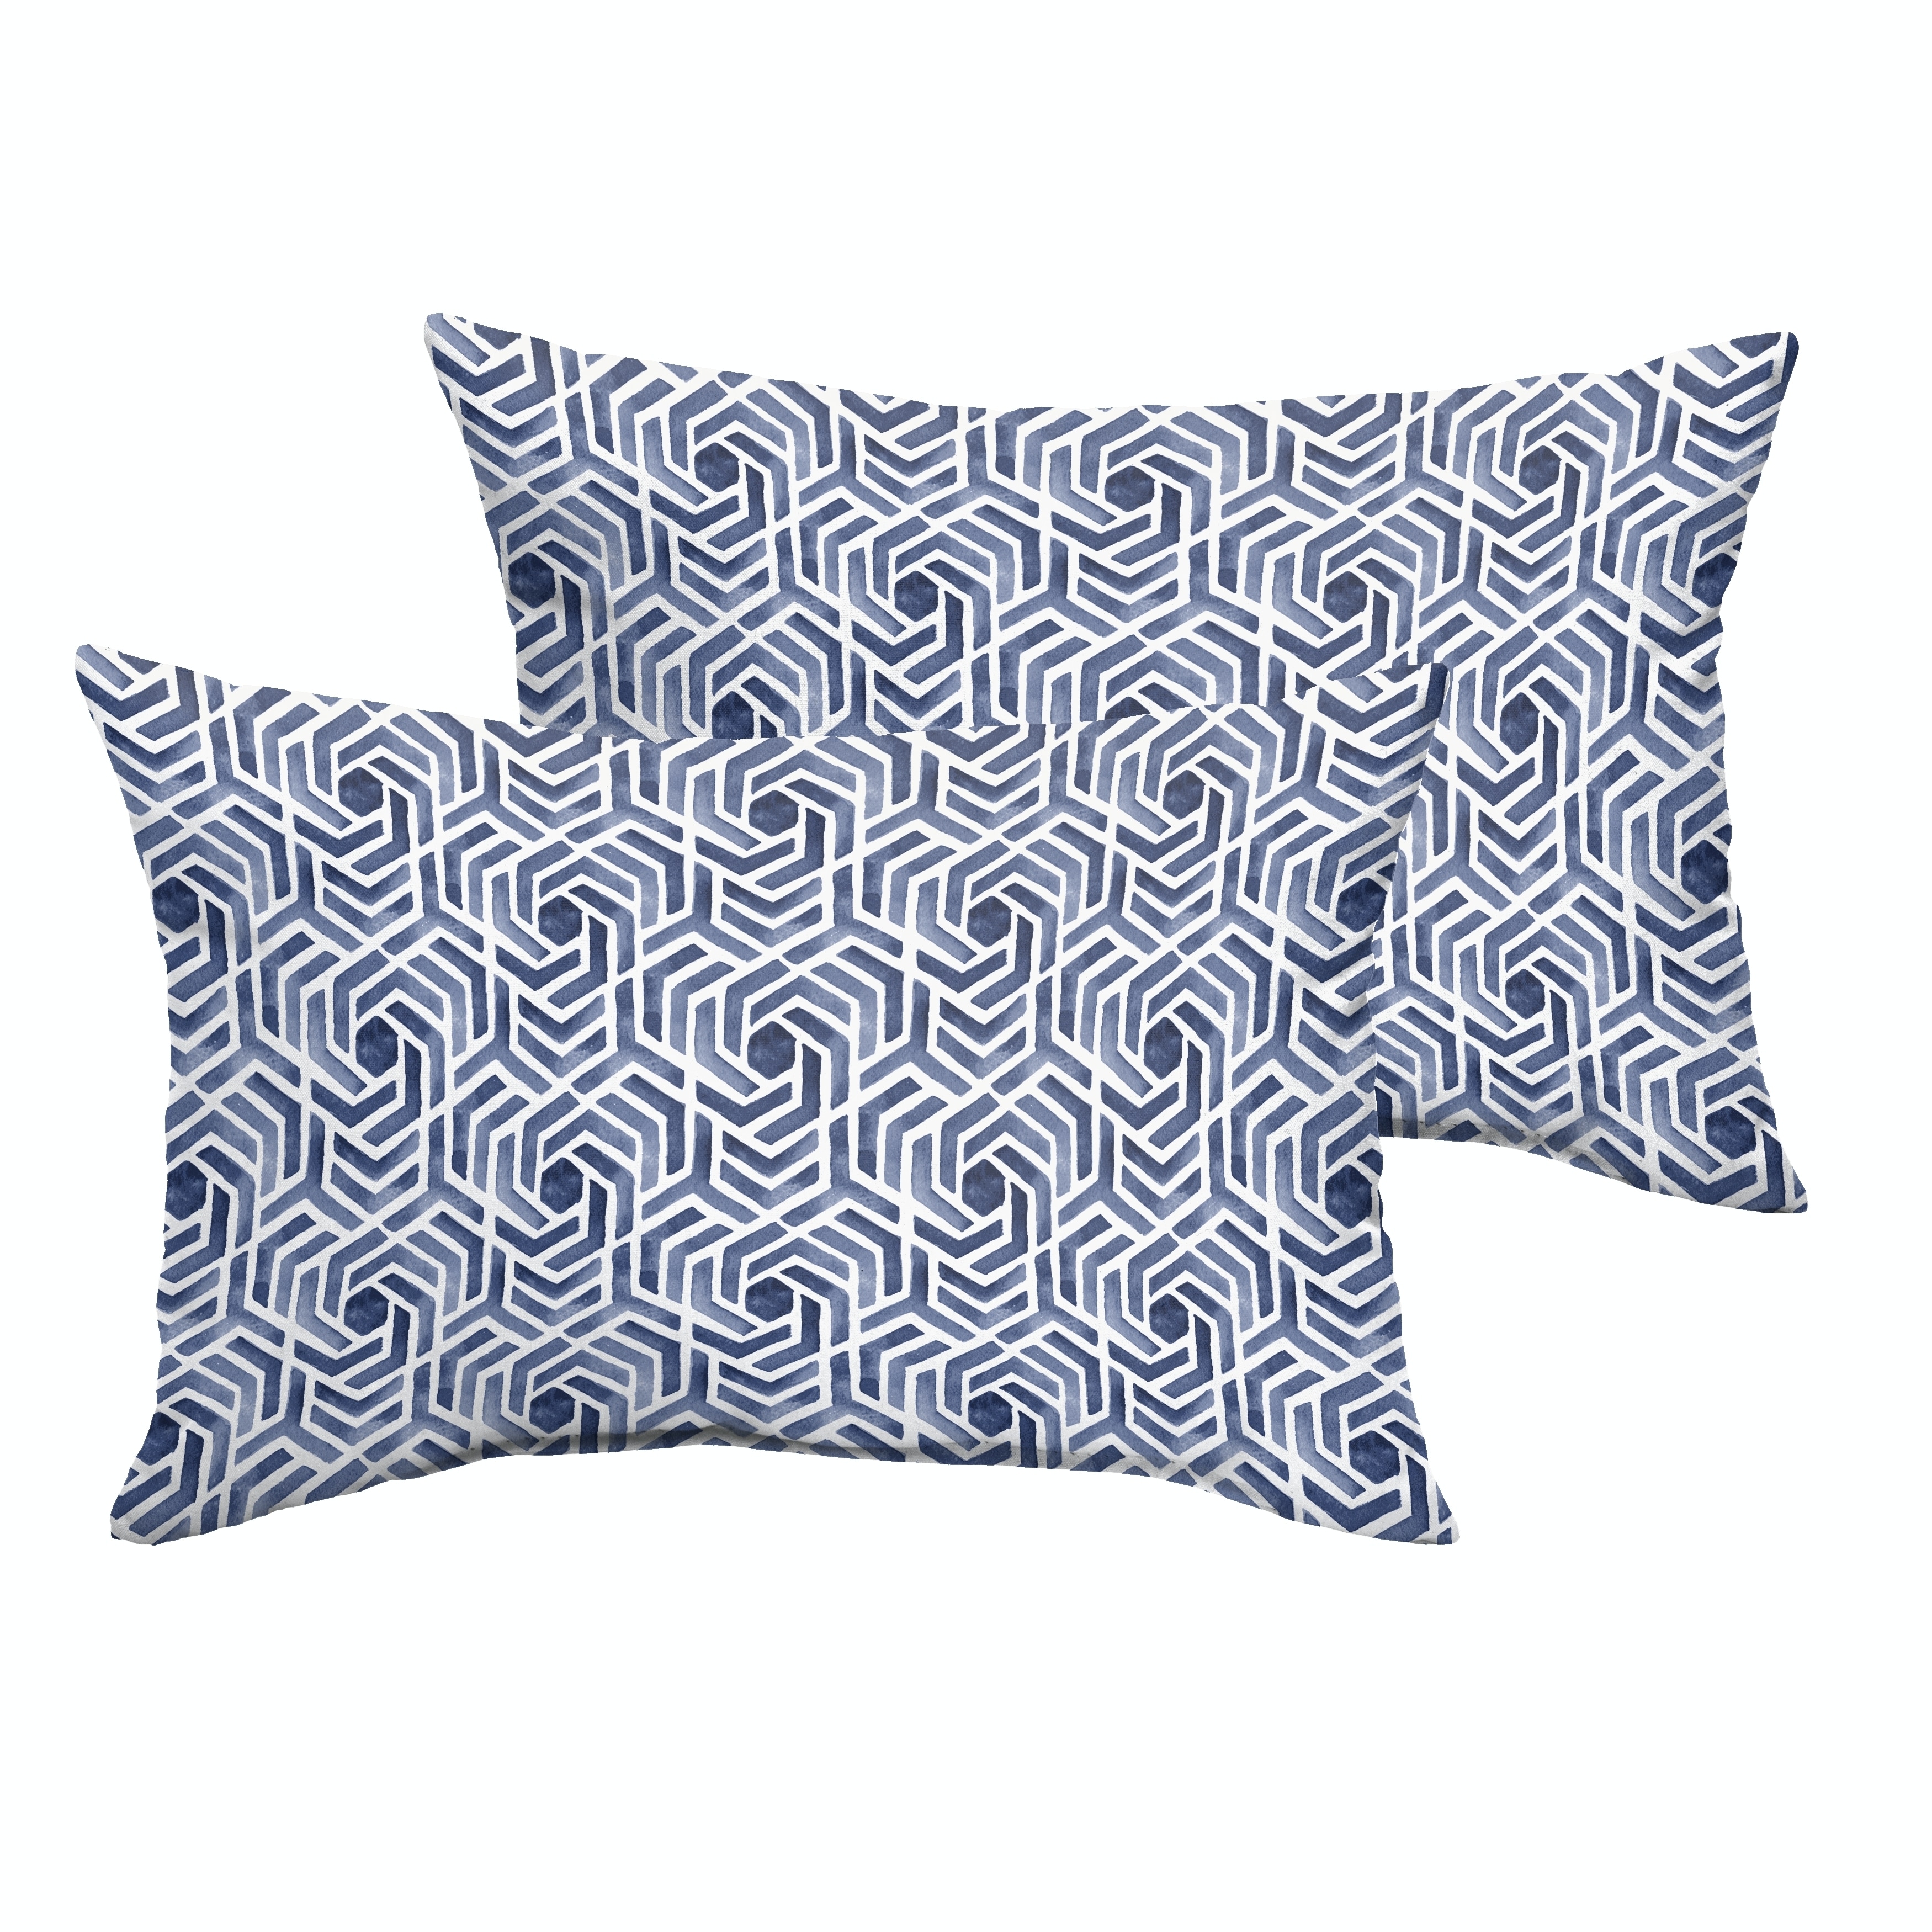 Artisan Pillows 18-inch Indoor/Outdoor Geometric Paisley in Blue Red - Pillow Cover Only (Set of 2)